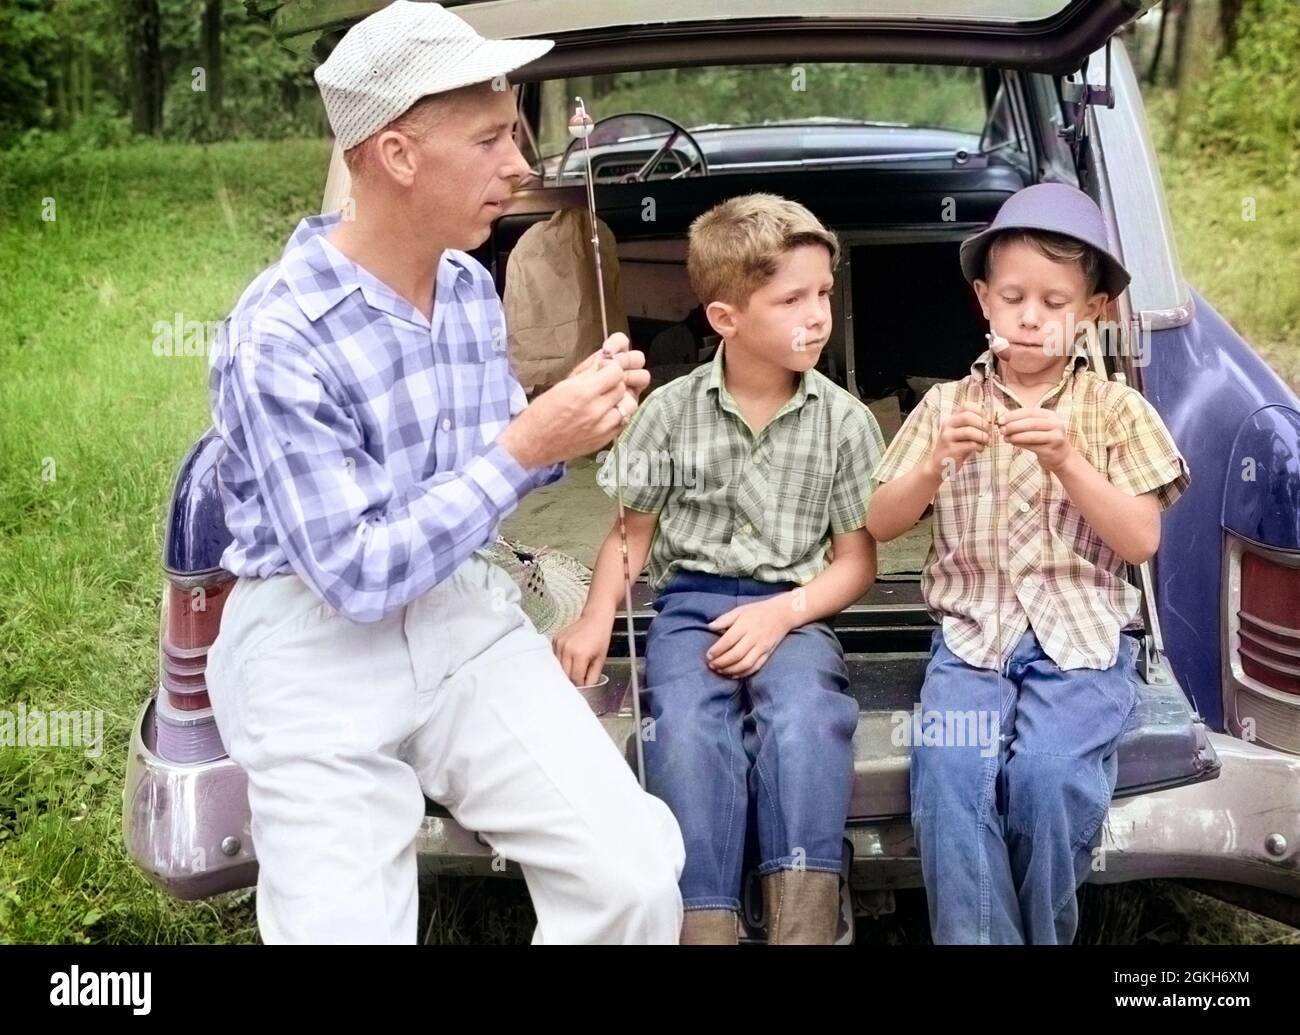 https://c8.alamy.com/comp/2GKH6XM/1950s-1960s-father-two-young-sons-with-fishing-rods-by-car-outdoor-a2309c-lan001-hars-brother-old-fashion-auto-1-juvenile-pole-vehicle-vacation-sons-lifestyle-parenting-brothers-relation-fisherman-nature-transport-half-length-persons-automobile-males-siblings-tackle-transportation-fathers-angler-bw-paternal-single-parent-parent-and-child-poles-time-off-single-parents-parents-and-children-fatherhood-fishing-pole-fishing-tackle-adventure-hobby-trip-getaway-bonding-dads-recreation-father-and-child-father-and-son-holidays-motoring-recreation-fishing-relationships-sibling-angling-fishing-rod-2GKH6XM.jpg